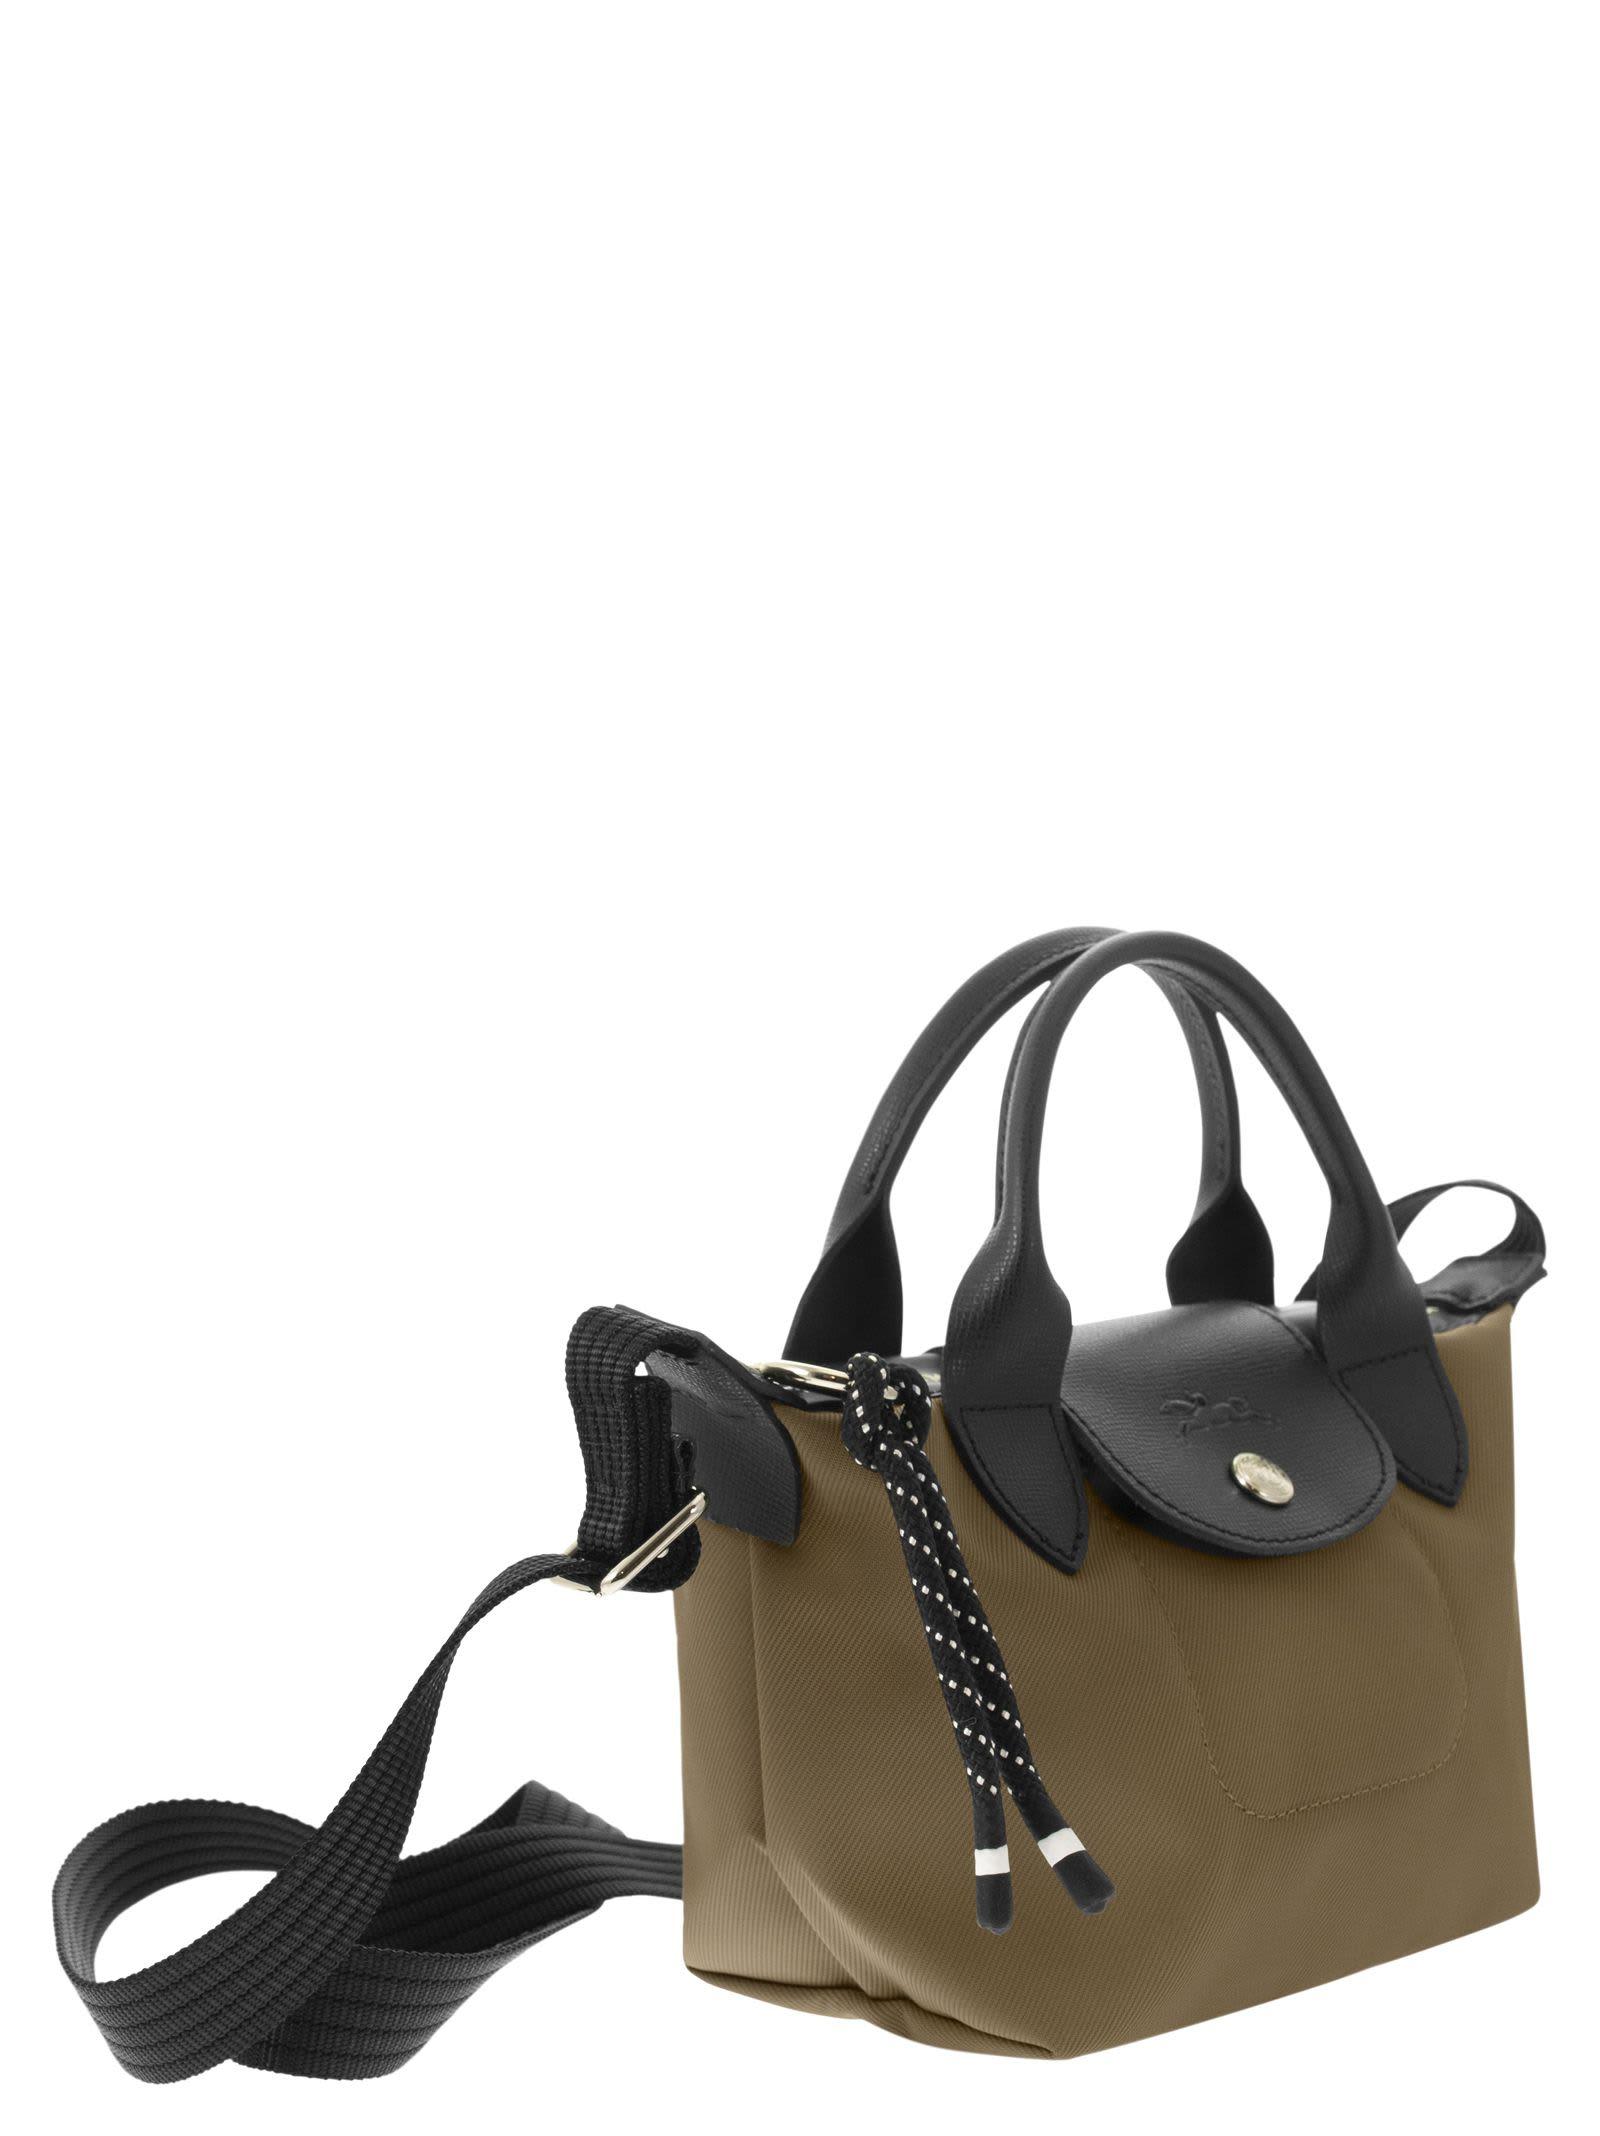 Longchamp Le Pliage Energy - Bag With Handle Xs in Black | Lyst